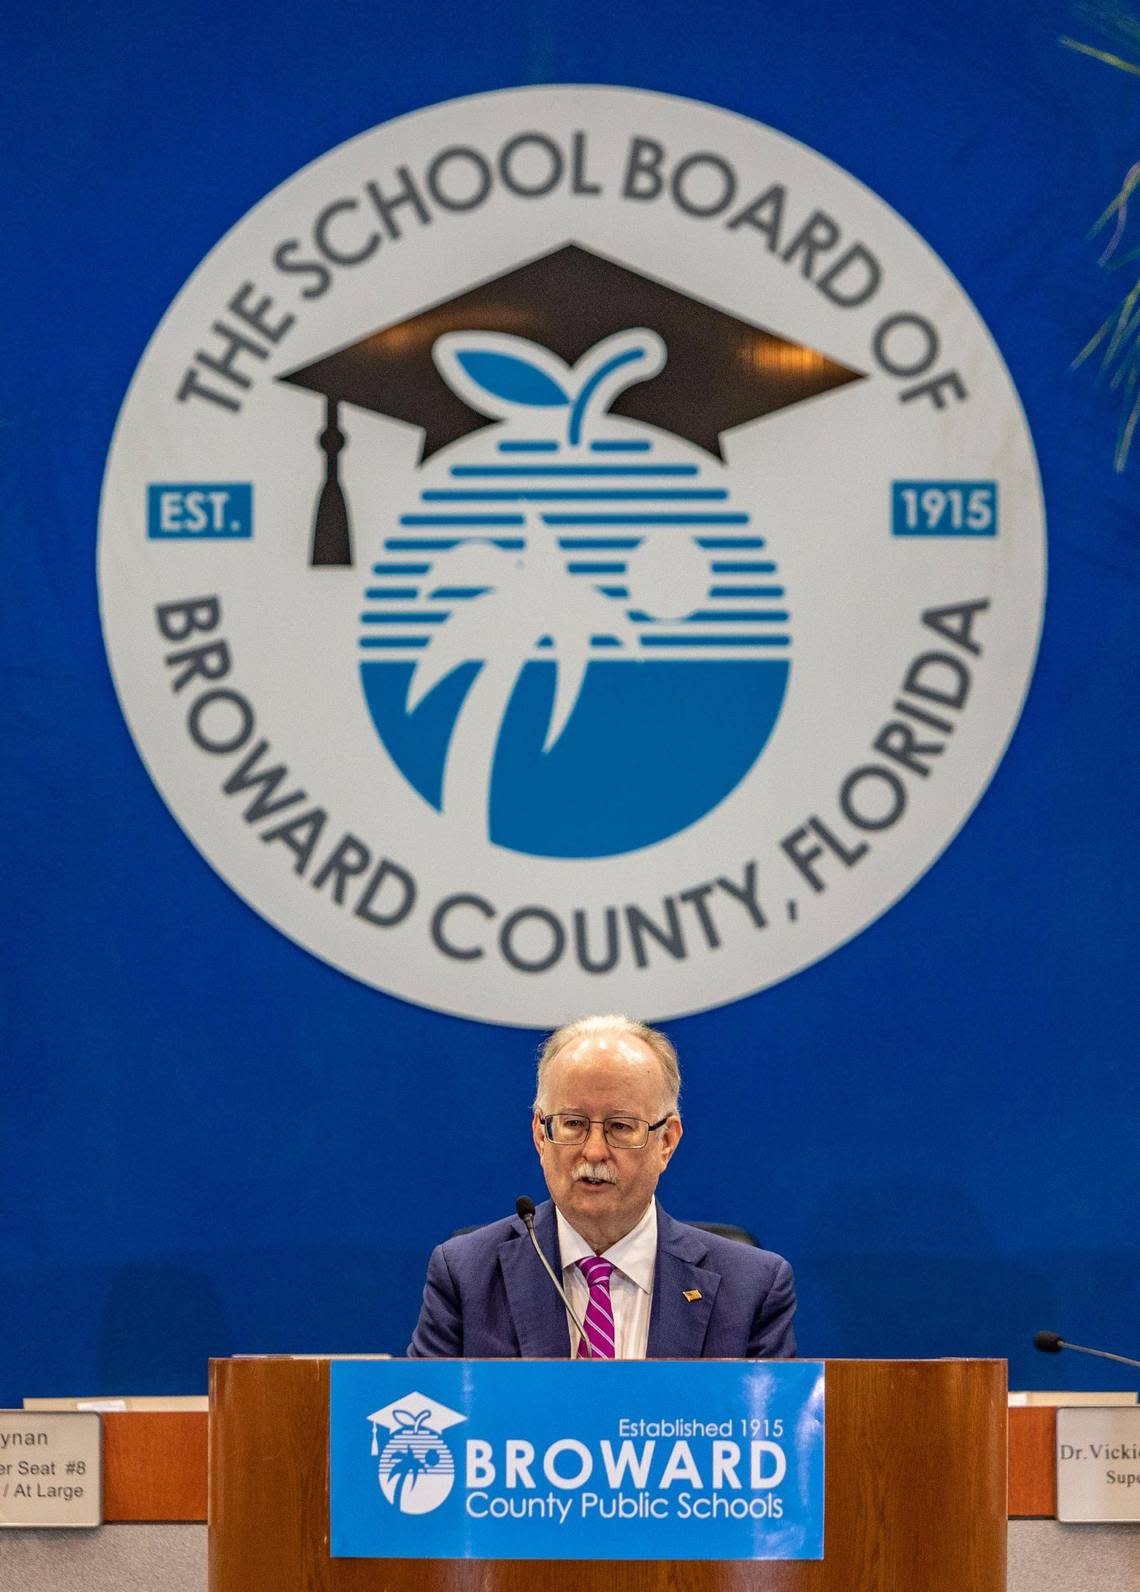 Kevin Tynan, one of the four new Broward School Board members, speaks after being sworn in at the Kathleen C. Wright Administration Center in Fort Lauderdale on Tuesday, Aug. 30.